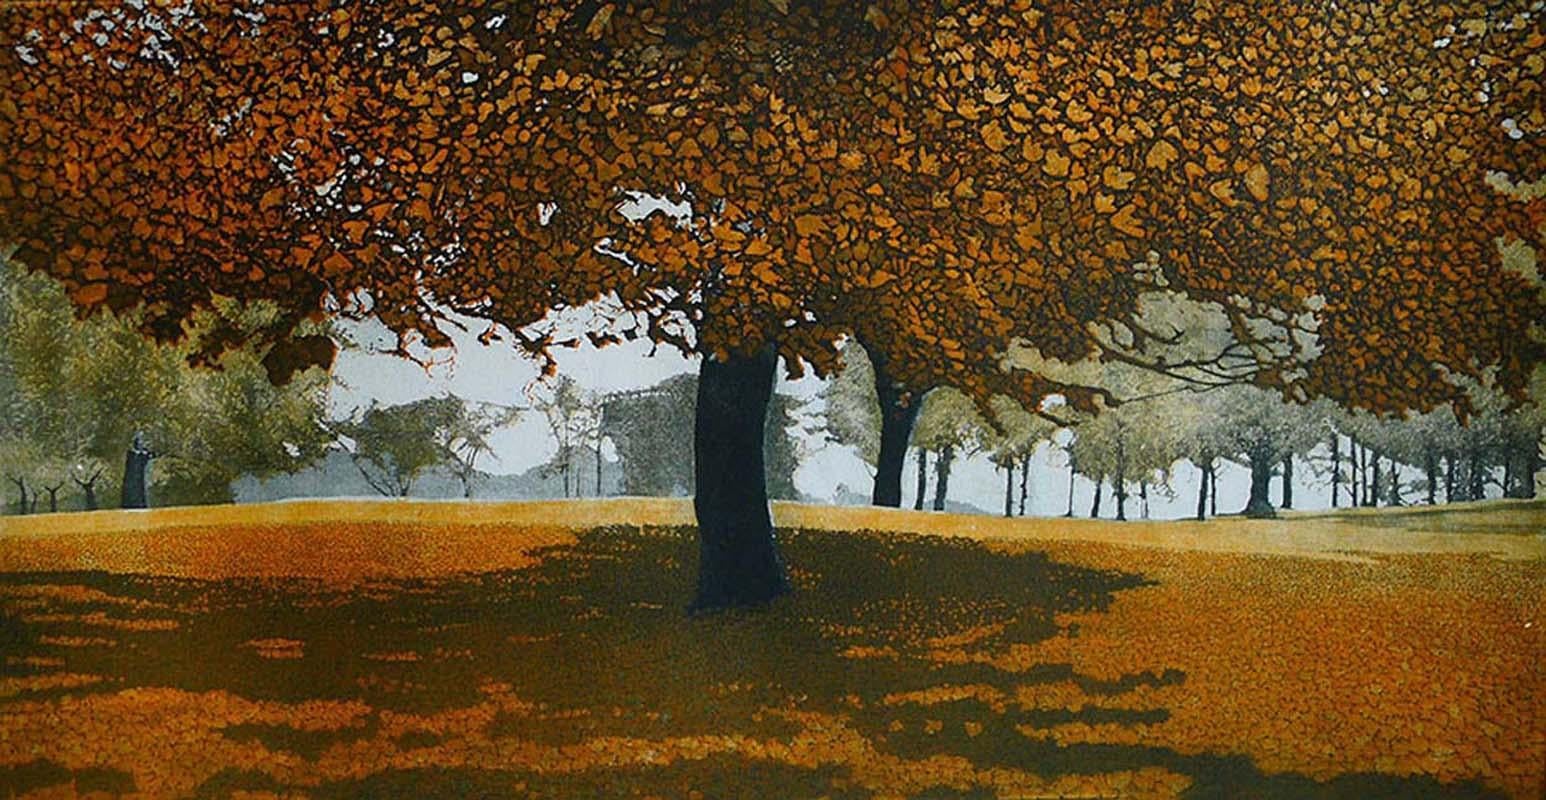 River Light - limited edition, etching and aquatint, edition size: 90 - Unframed.

Other images show other works available by this artist.


Phil Greenwood was born in 1943 in Dolgellau, North Wales and now lives in Kent. Educated at Harrow and